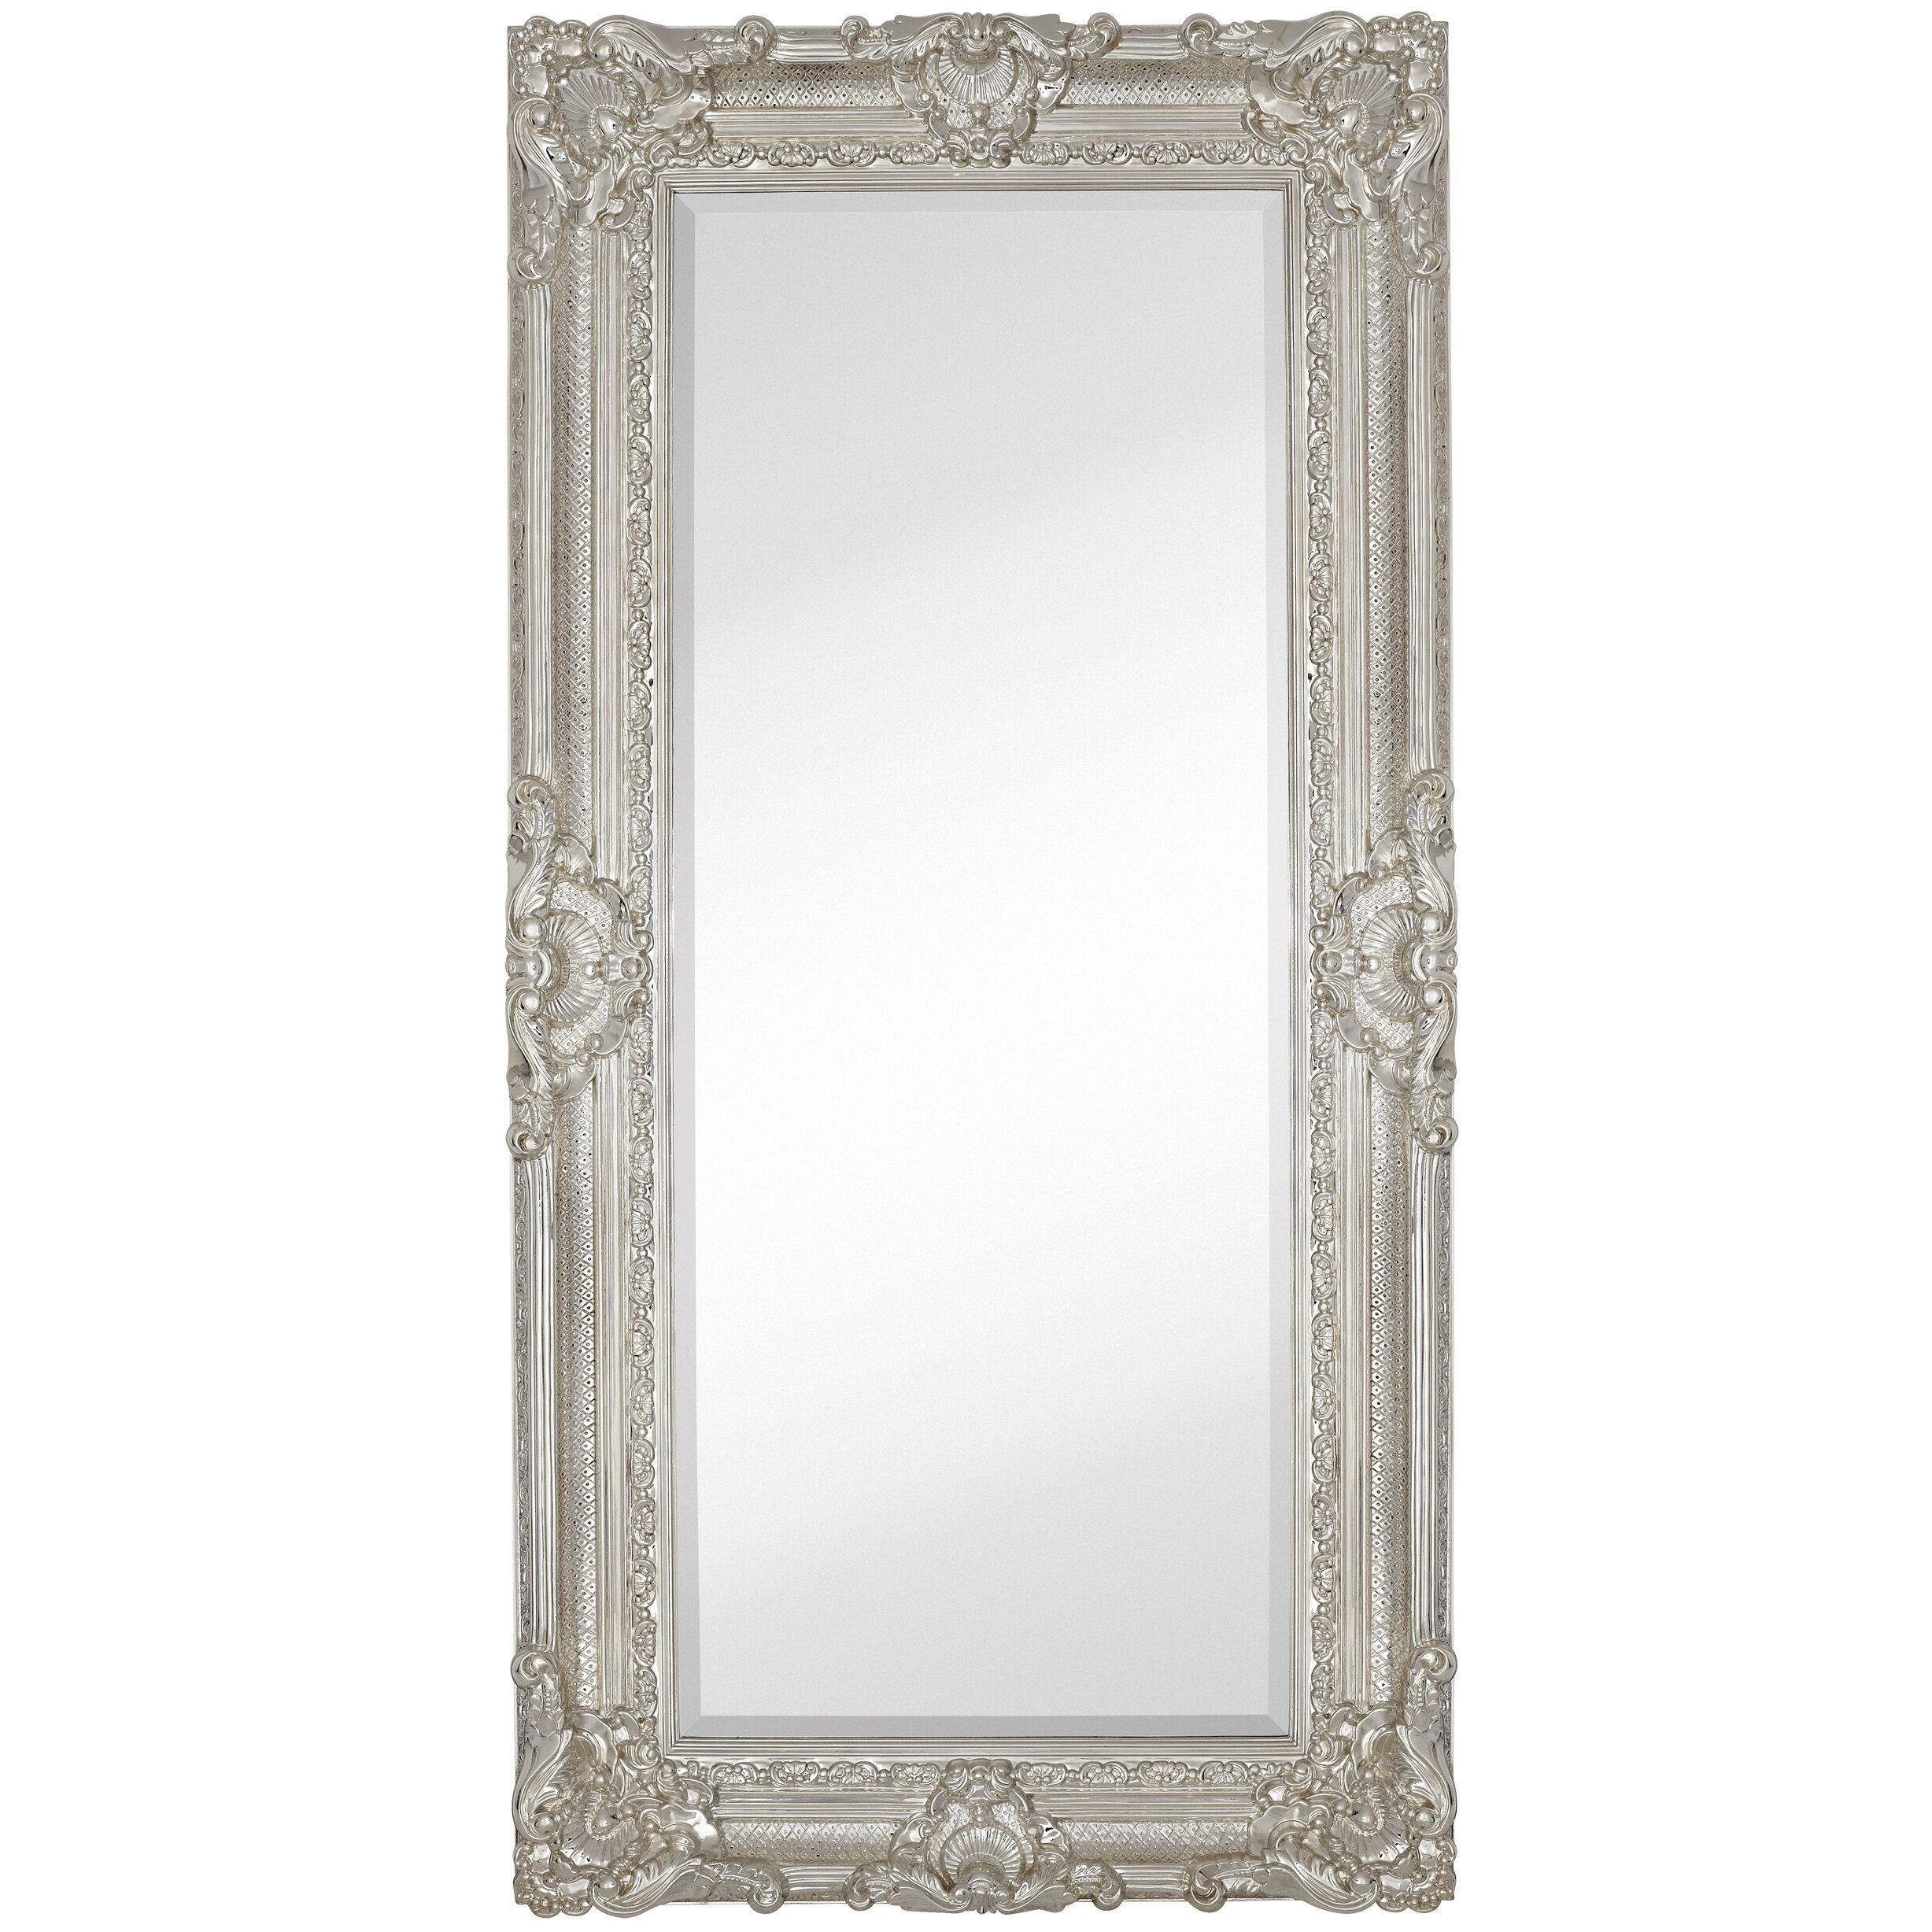 Majestic Mirror Large Traditional Polished Chrome Rectangular Beveled Within Traditional Beveled Wall Mirrors (View 13 of 15)